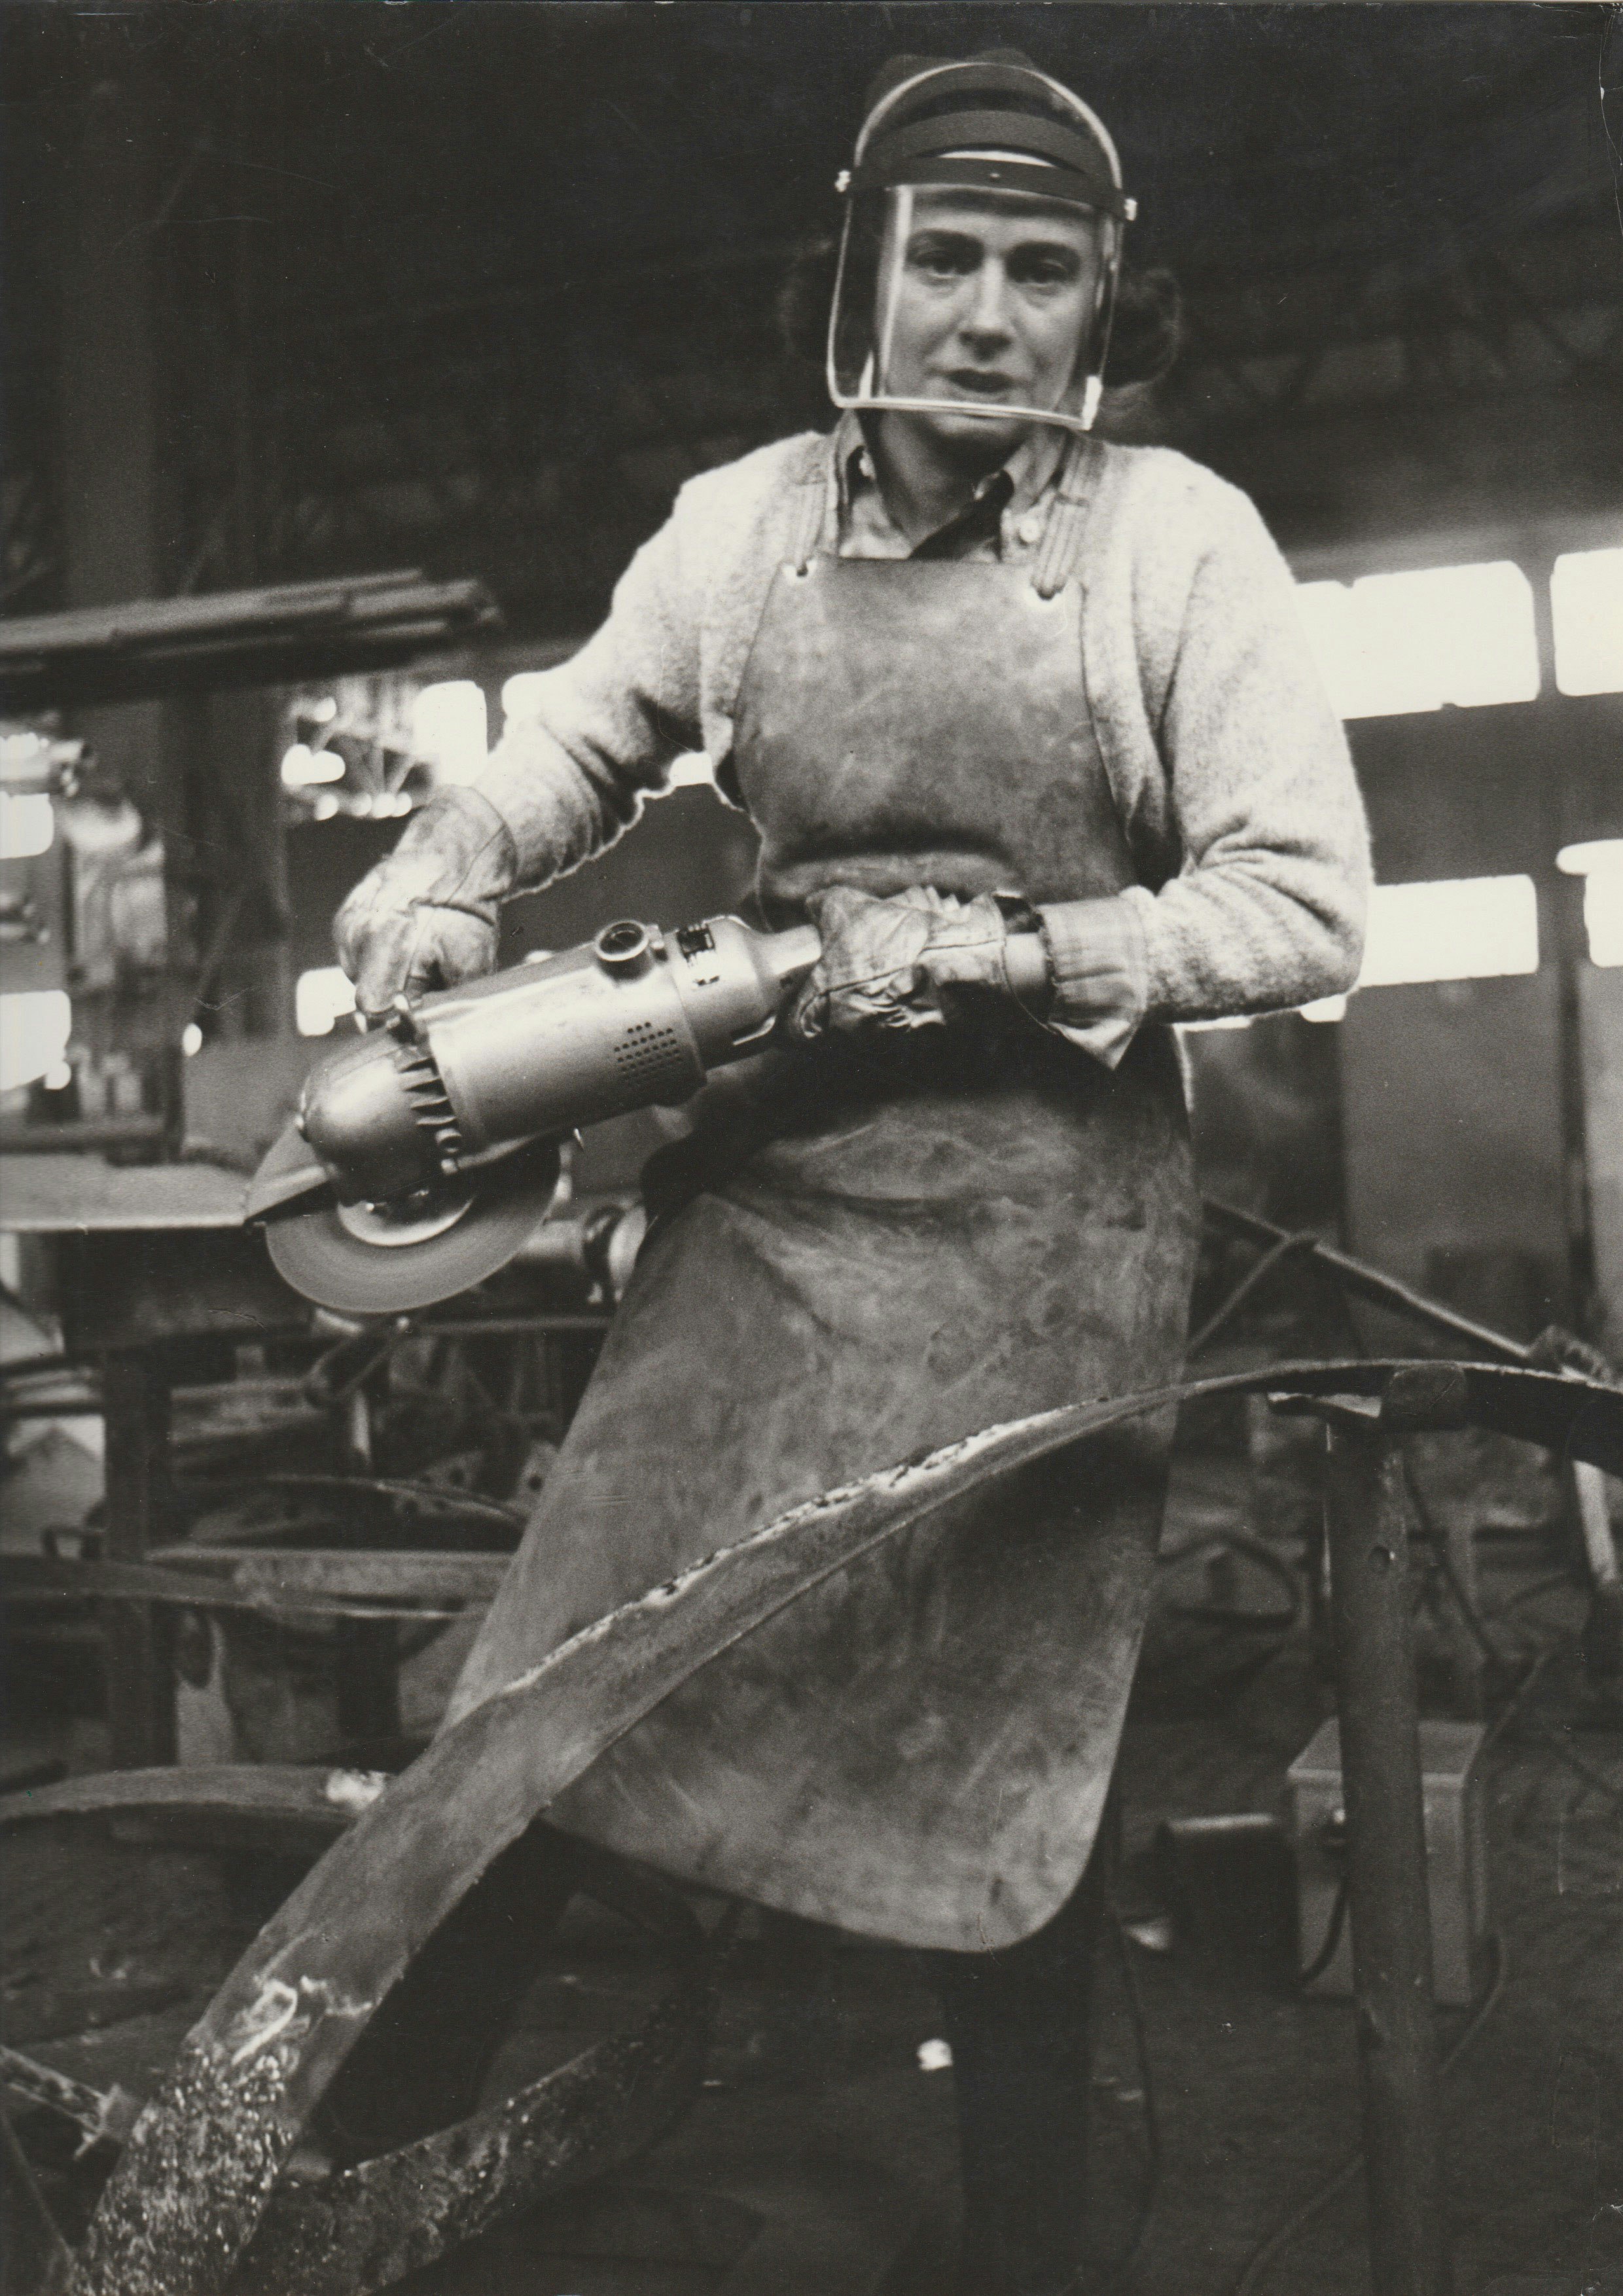 Beverly Pepper at work at the factory in Terni, Italy 1970. Courtesy of Beverly Pepper studio, Italy.